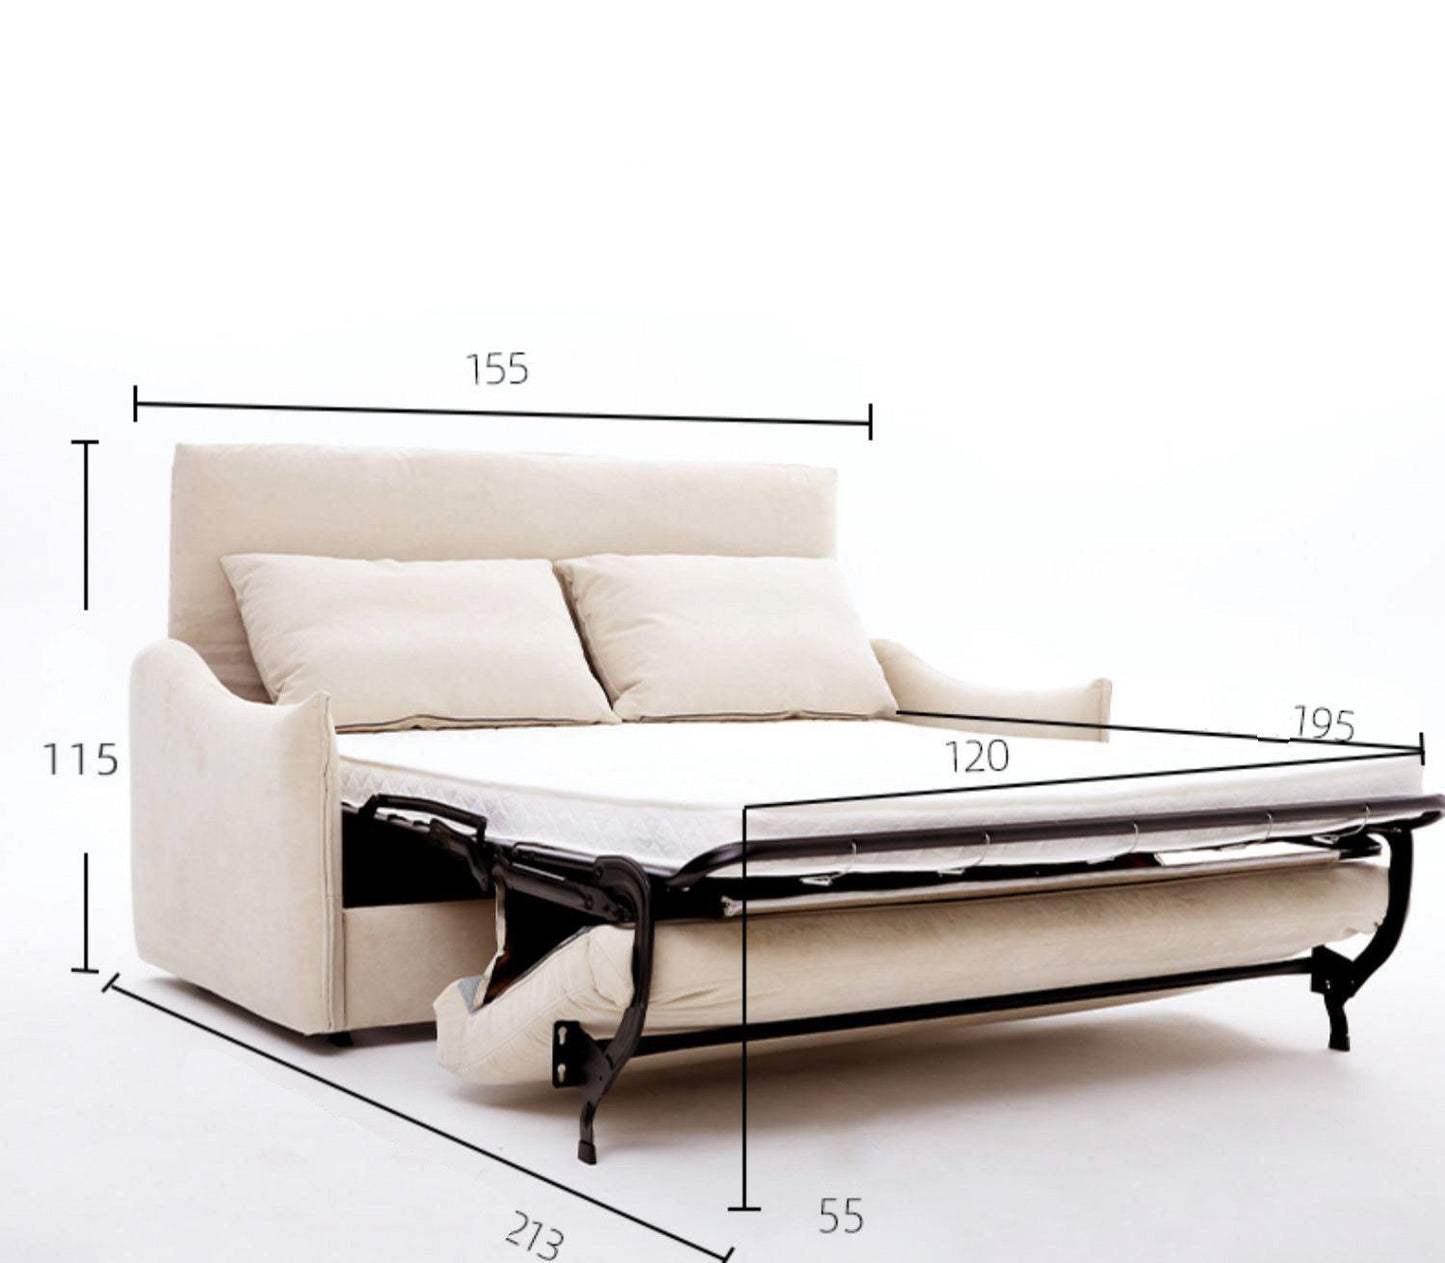 home-atelier-f31a Water Repellent and Scratch Resistant Fabric / Super Single Size/ Length 155cm / Cream Acacia Foldable Sofa Bed with Mattress